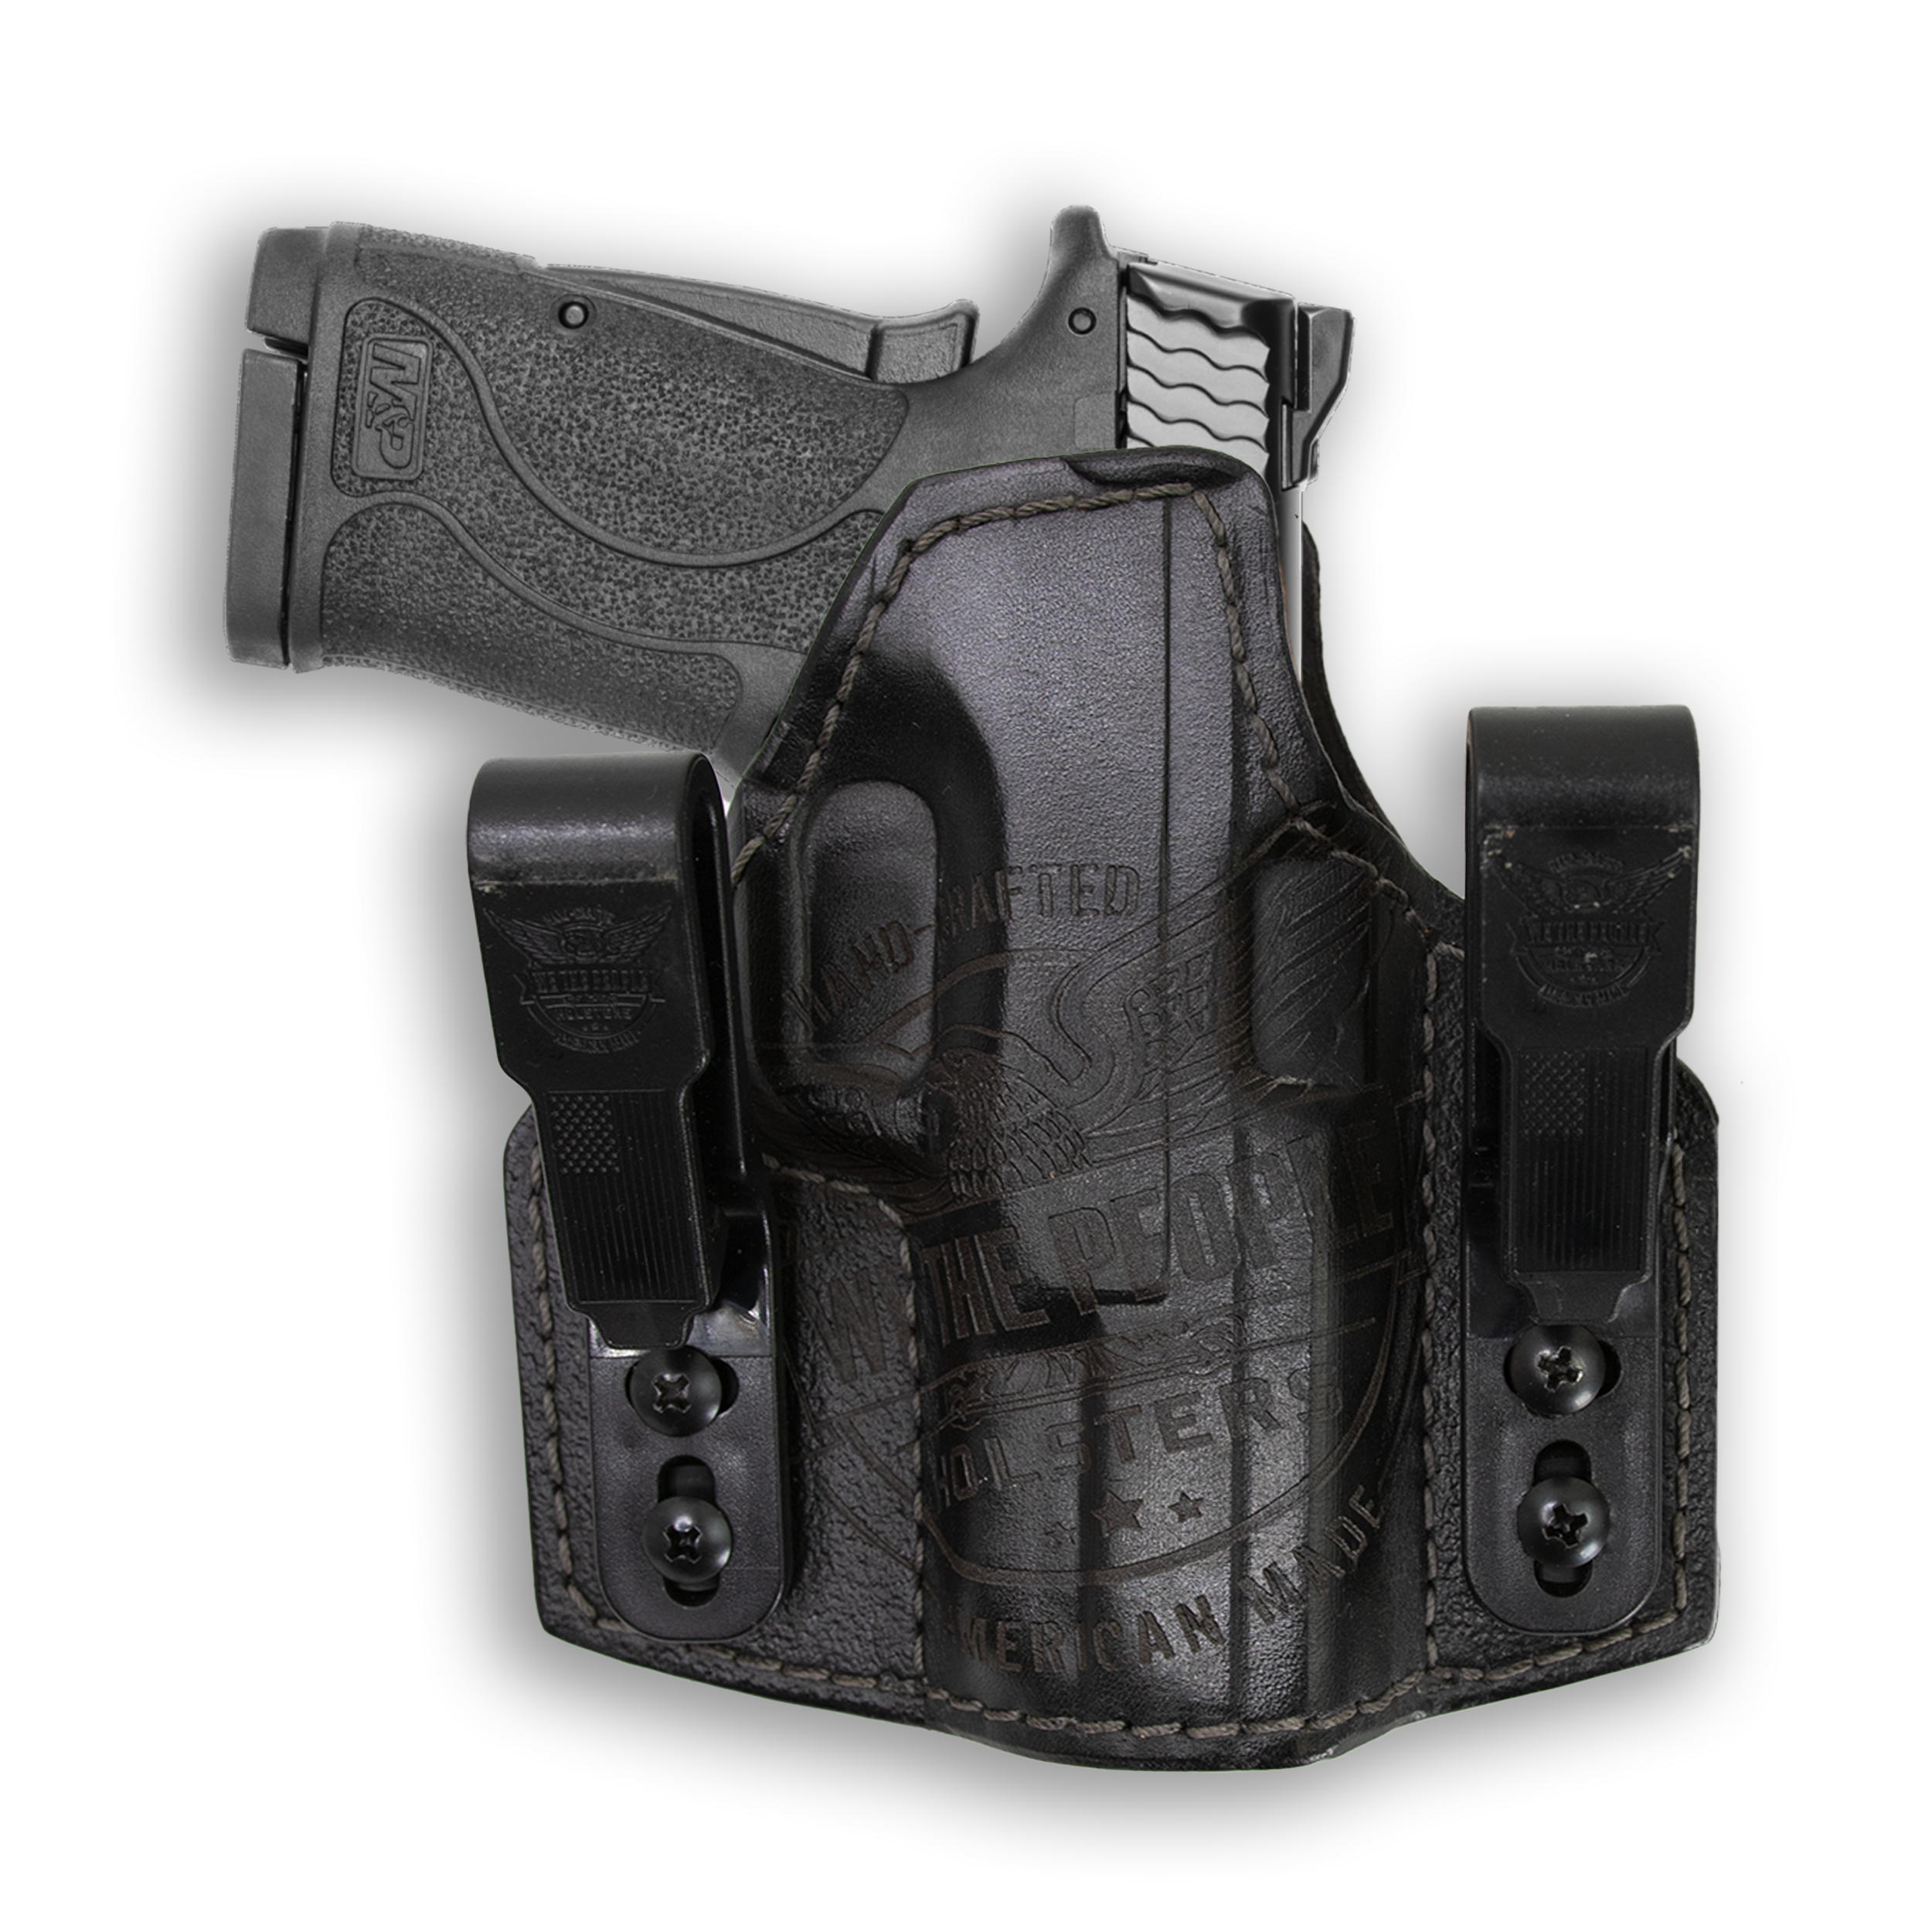  Left Holster for Carry, IWB Leather Gun Holsters for Glock 17  19 43X 44/ Sig P365/ Ruger Security 9/ Springfield Hellcat XDS/Taurus G2C  G3 G3C/ M&P 9mm Shield SD9VE SW9VE